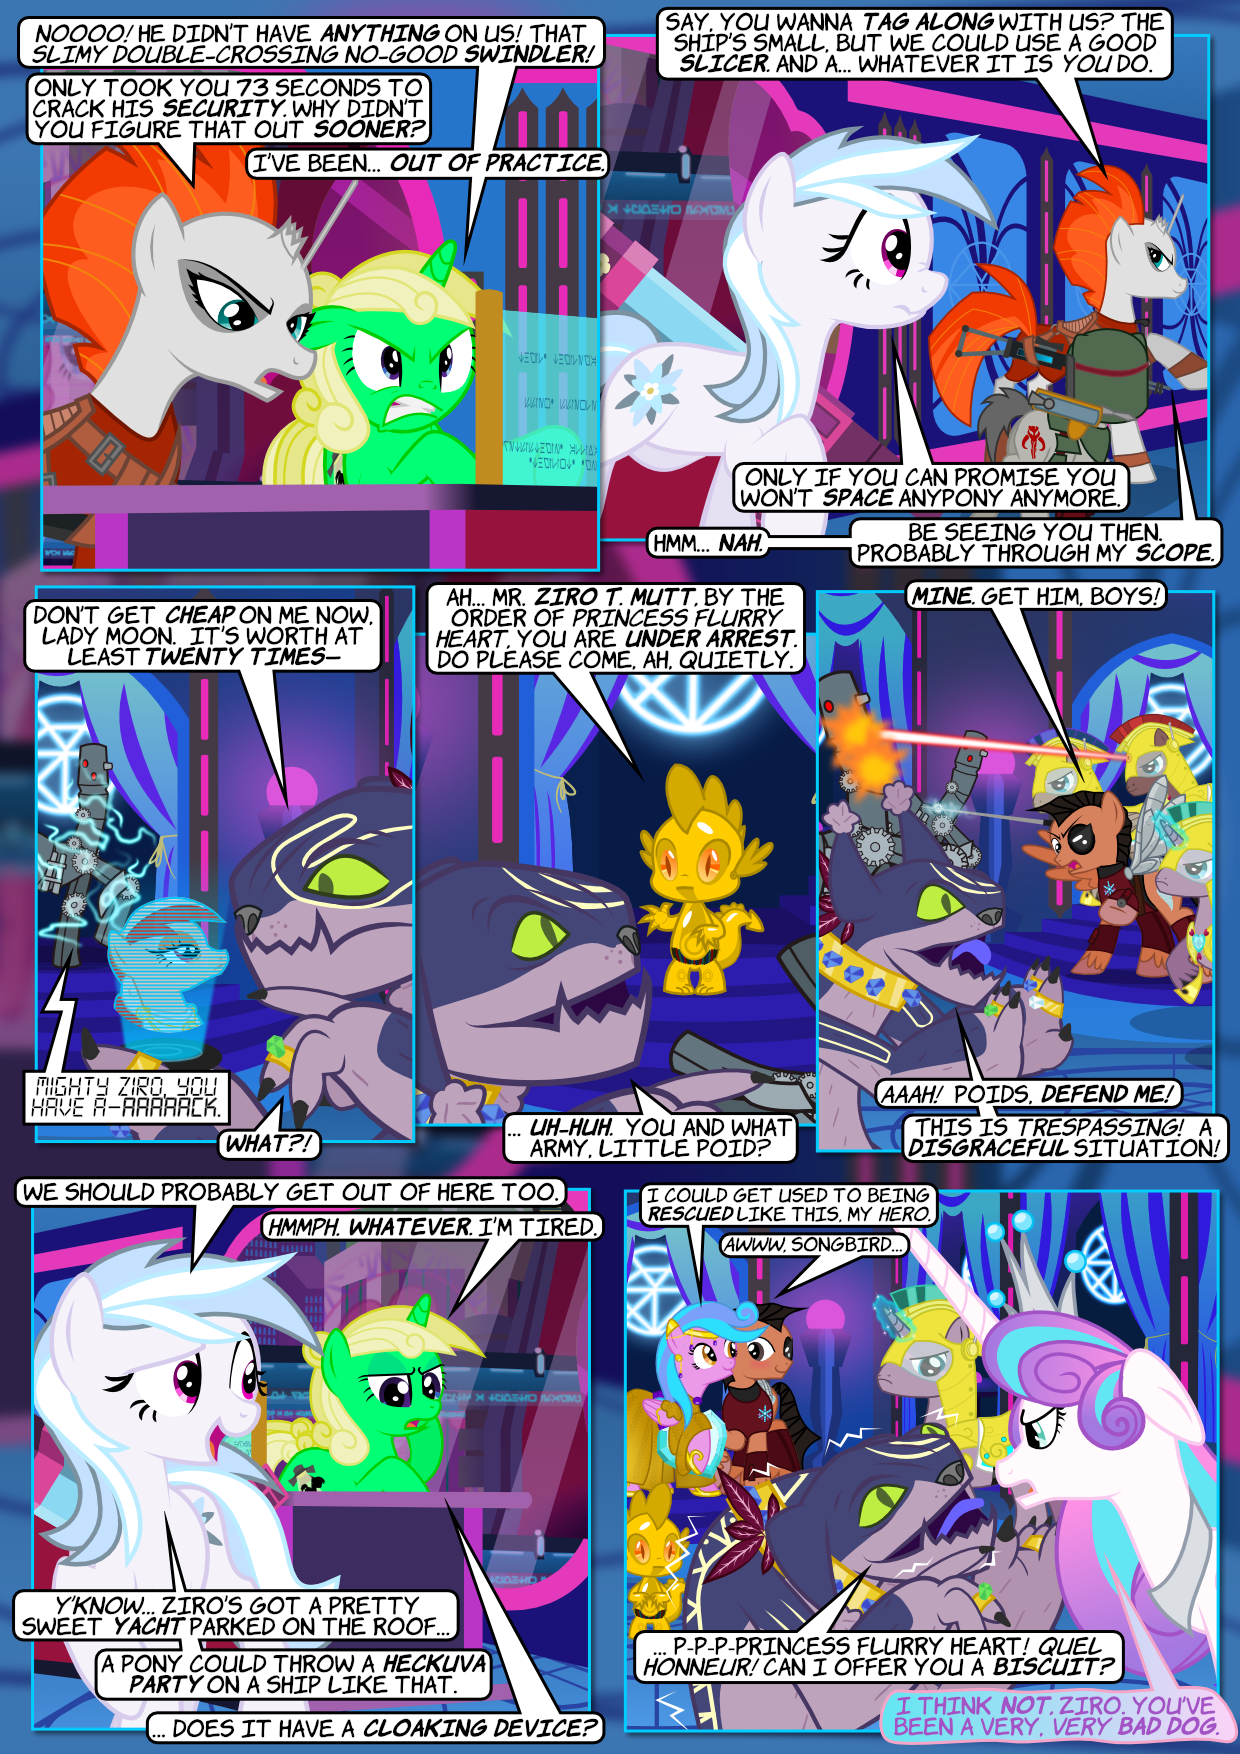 The Pone Wars 5.25: Firefight-or-flight